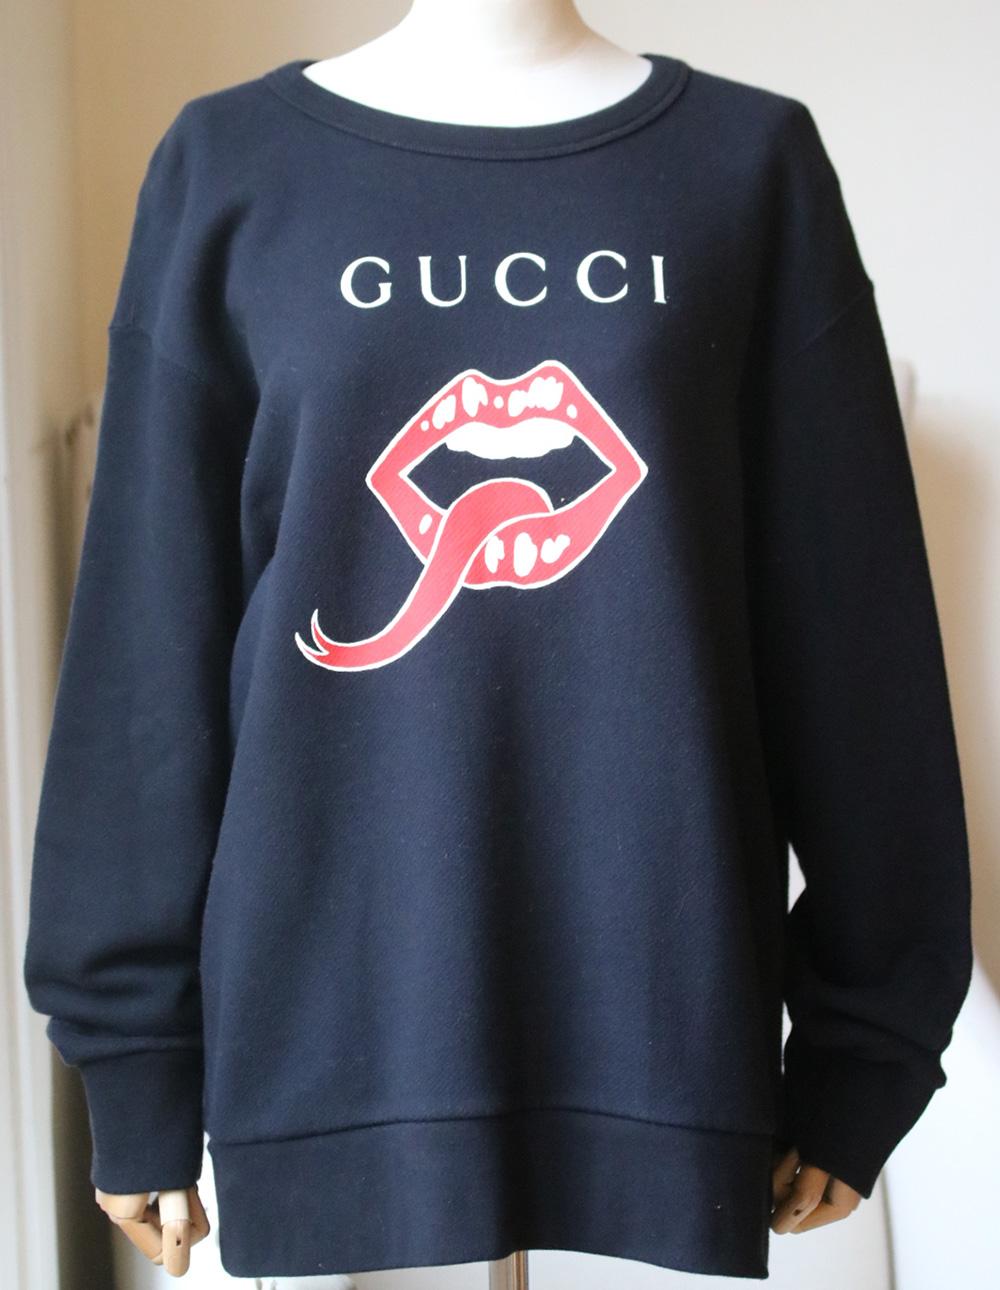 The red mouth print on the front of this black sweatshirt that echos the various punk, rock and gothic references seen in Gucci's latest collection. It's crafted from mid-weight loop-back cotton to a relaxed shape. The house's iconic motif across